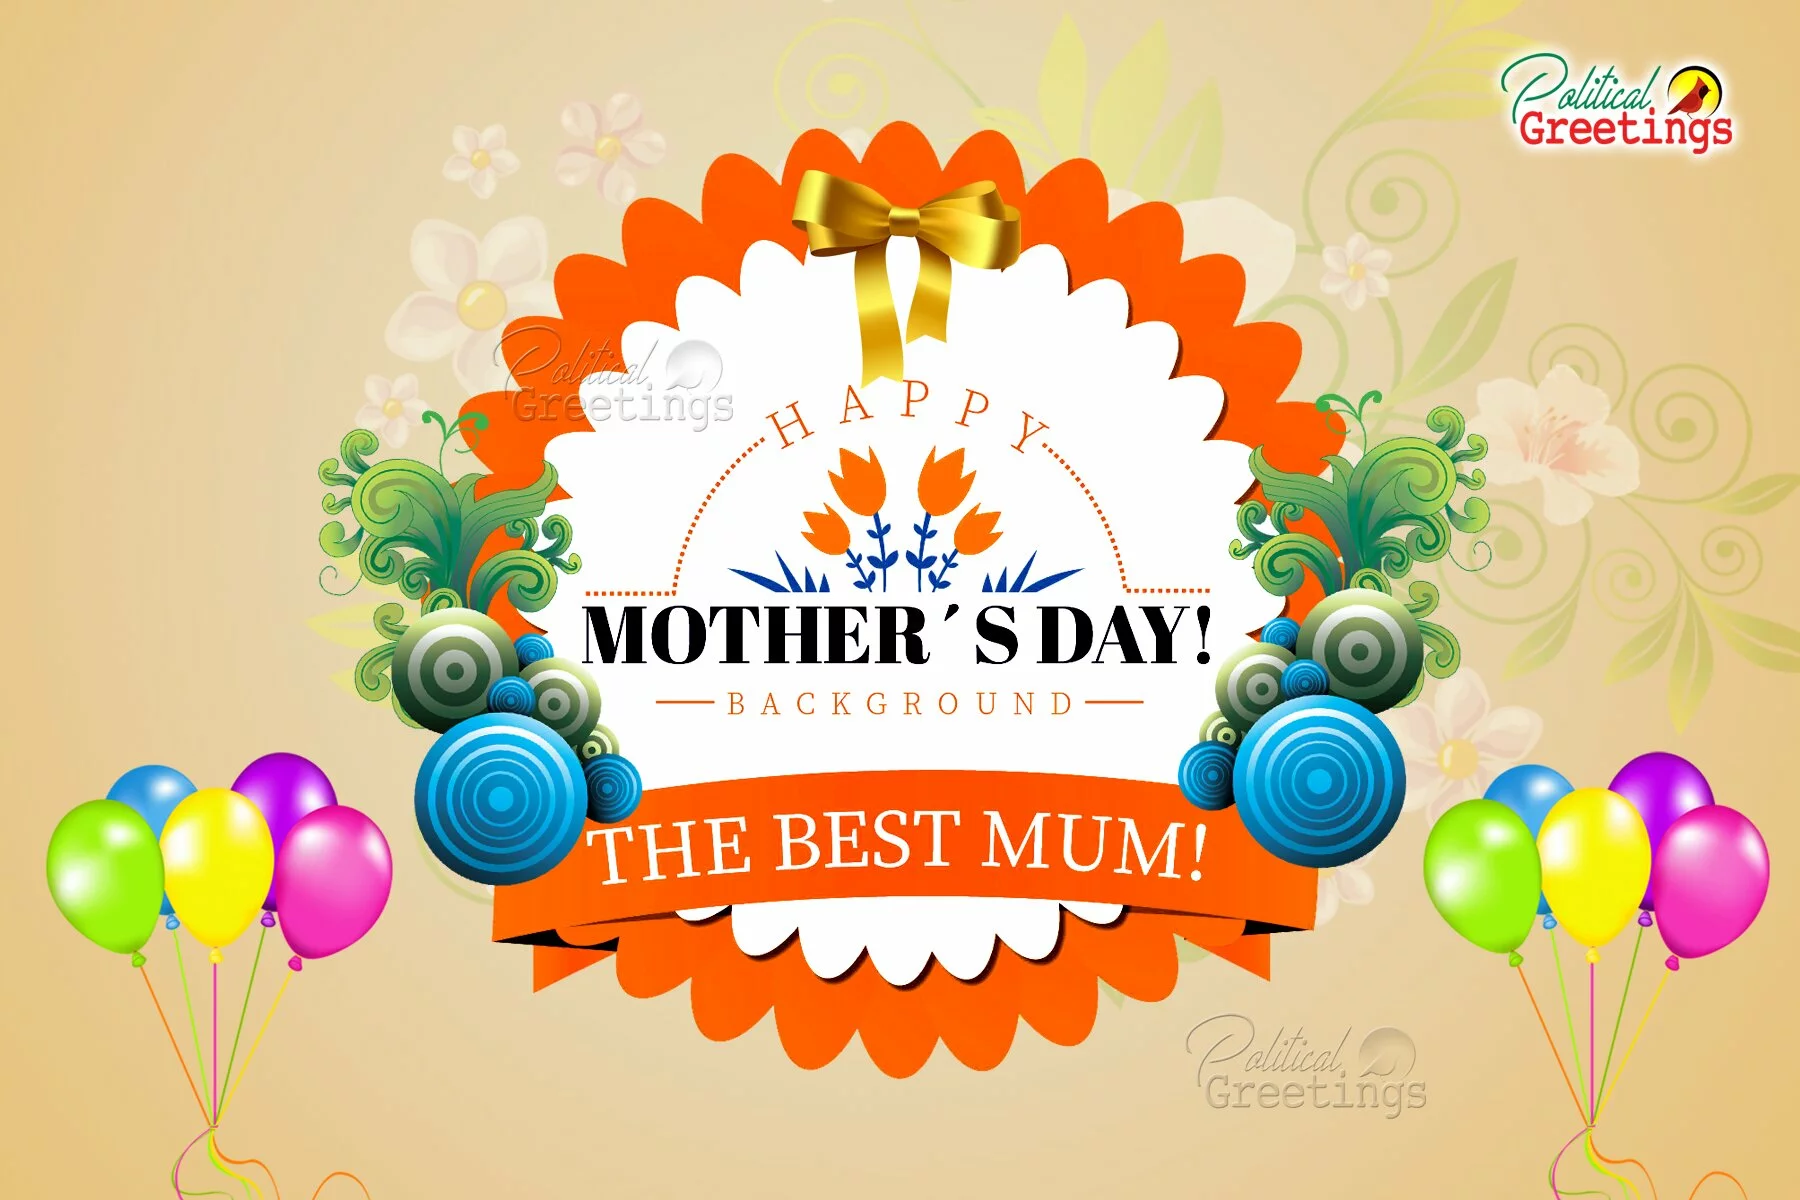 Mother's Day Telugu Greetings, Wishes, Quotes Pictures & Wallpapers